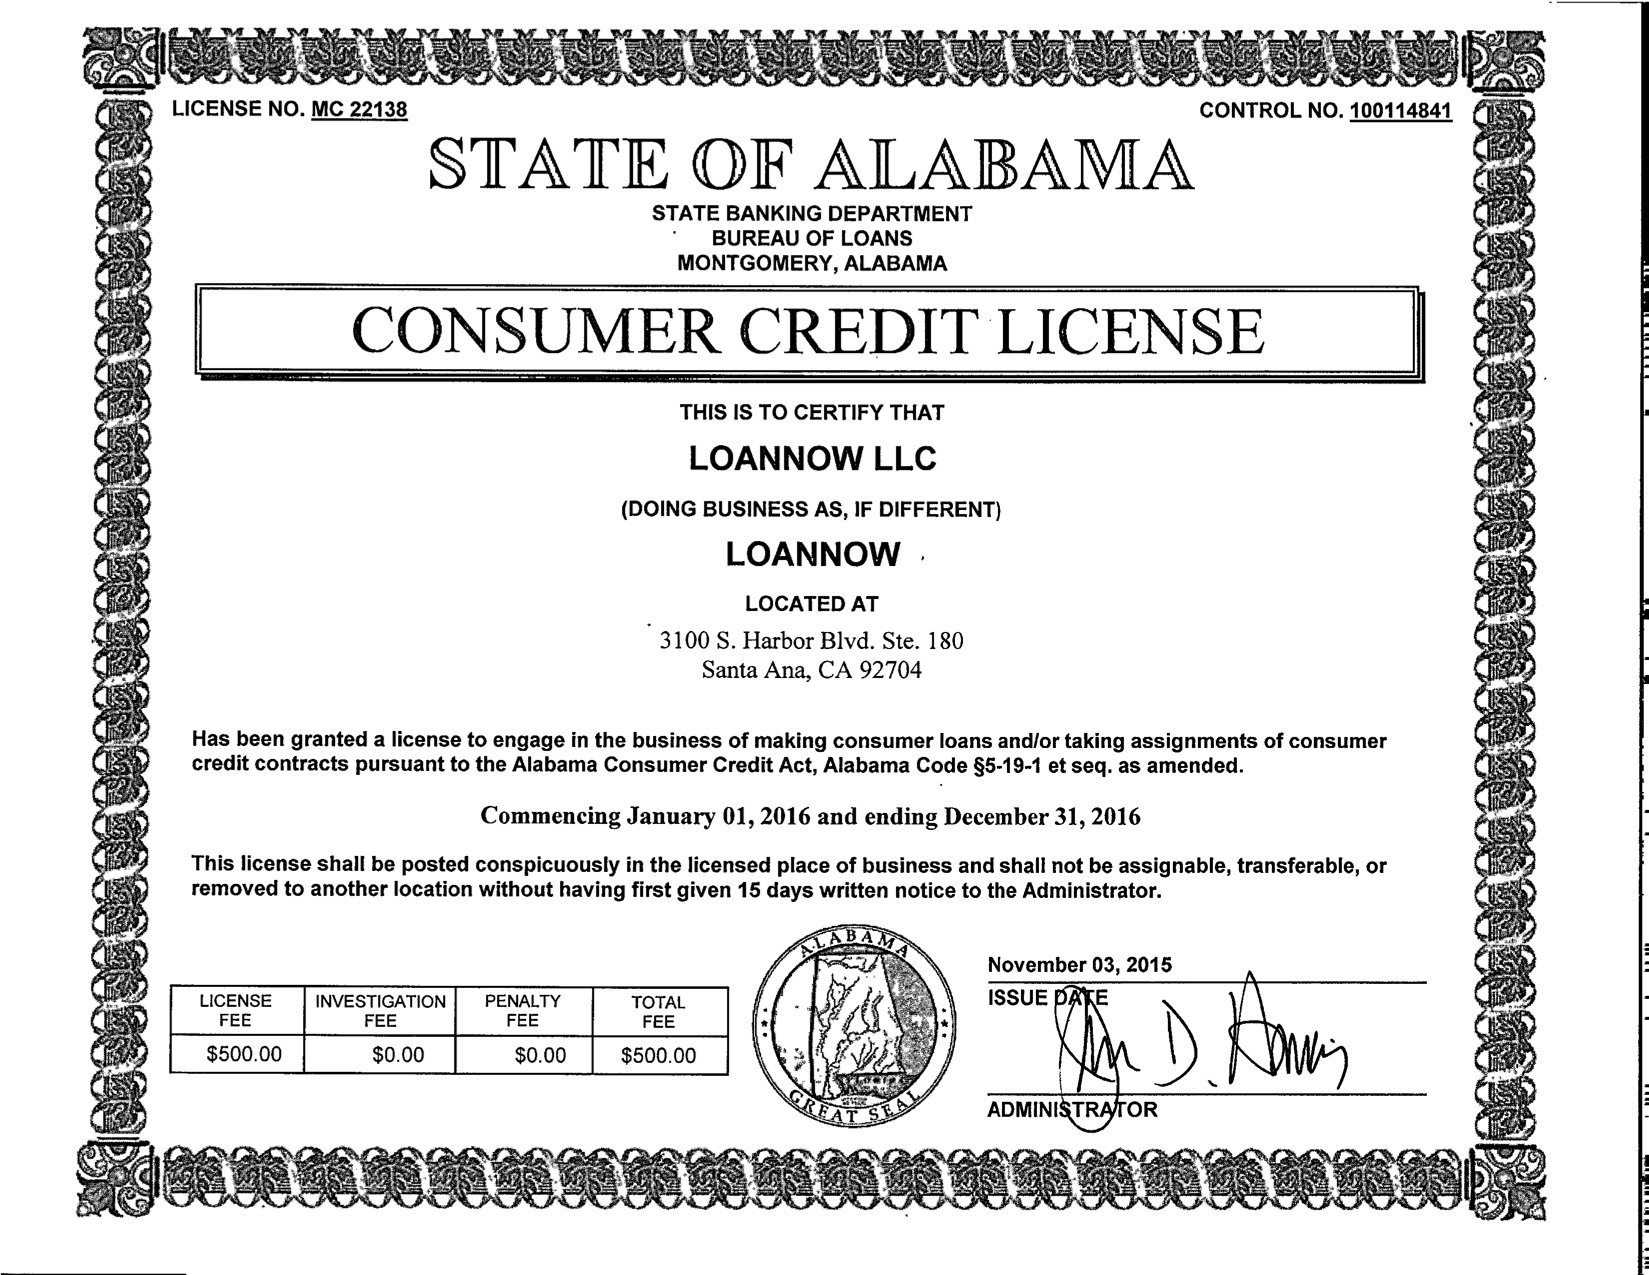 LoanNow Licensing